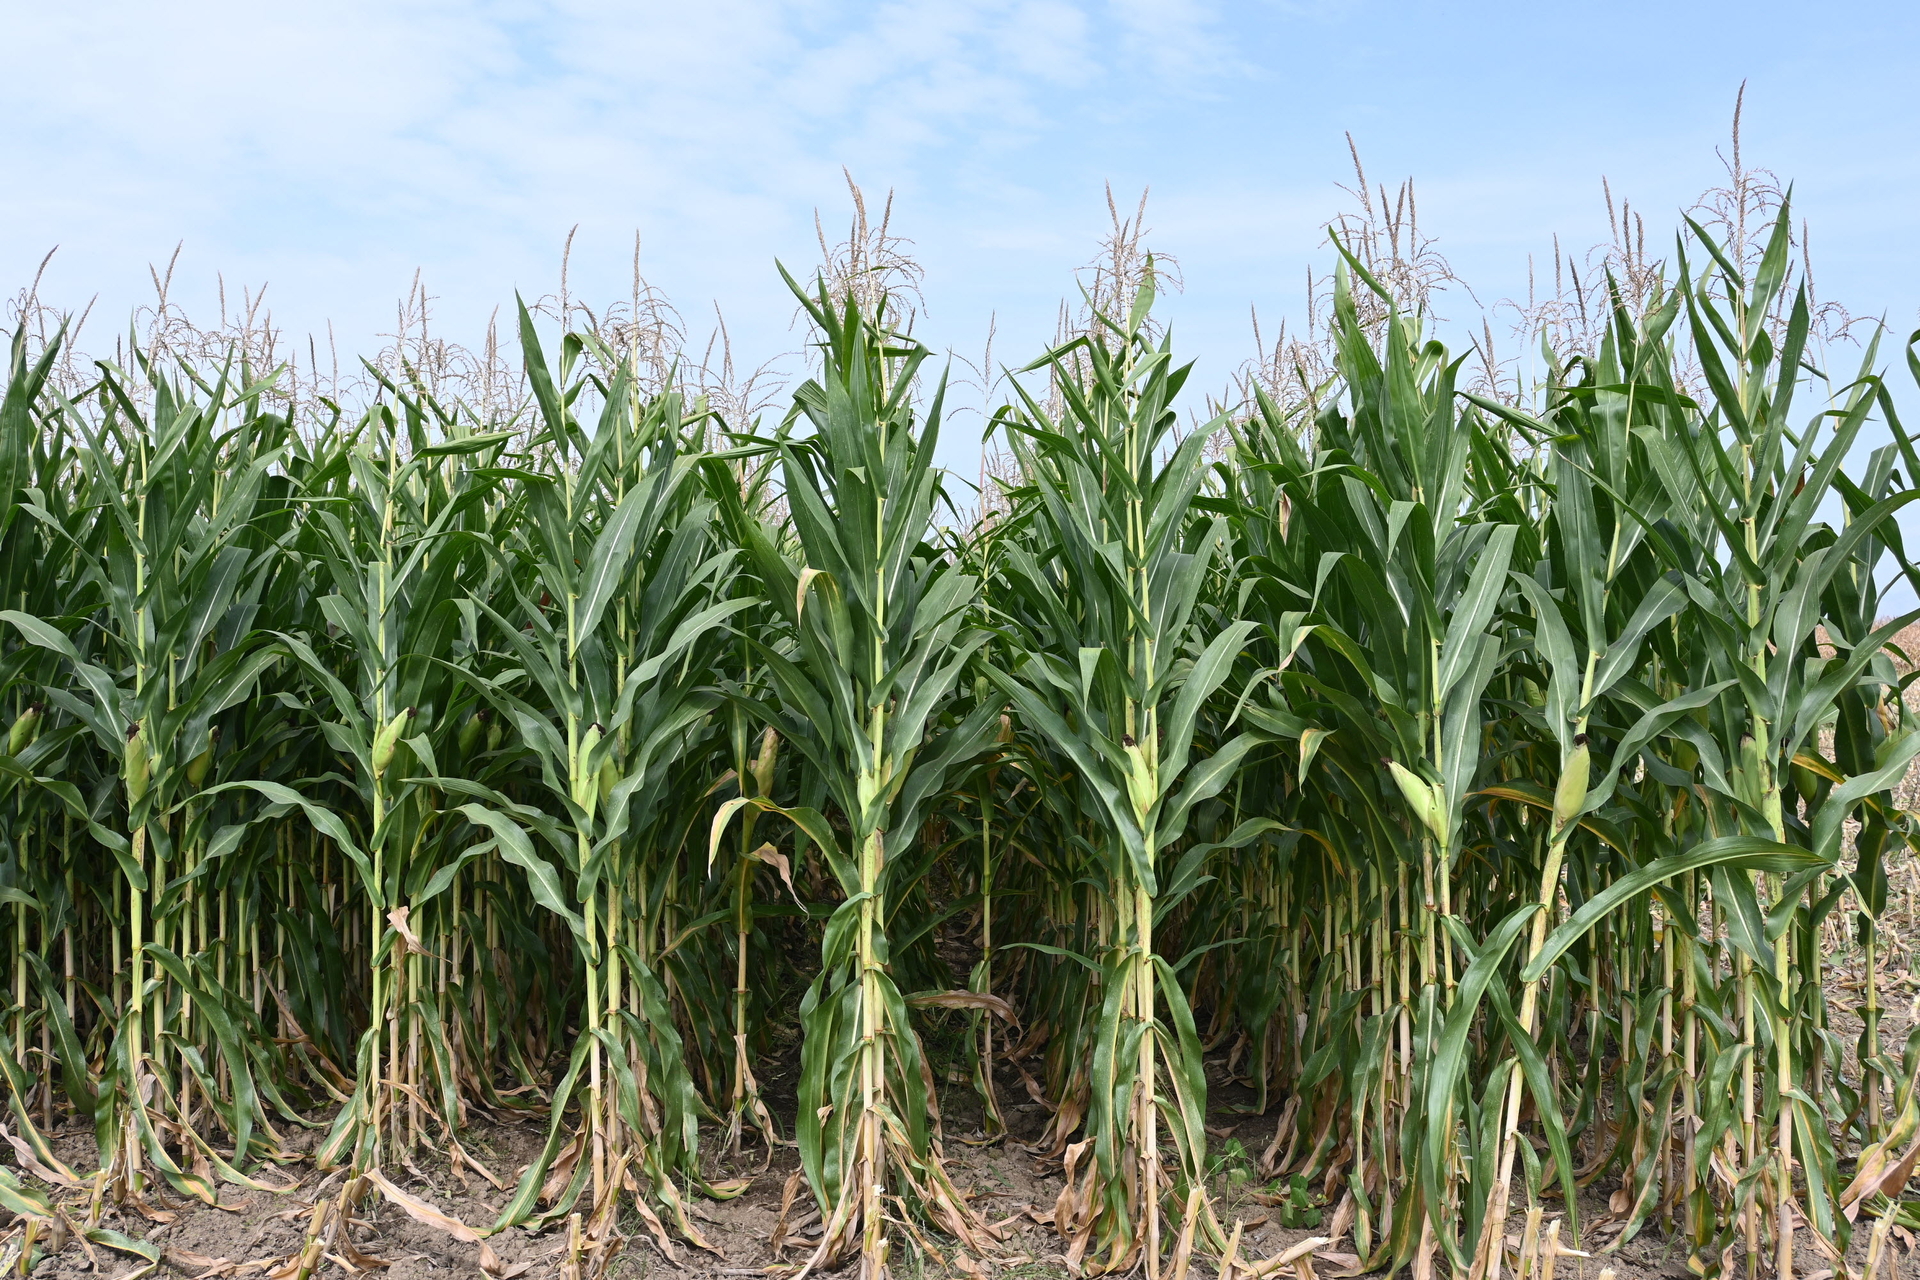 Maize growing in North Macedonia.